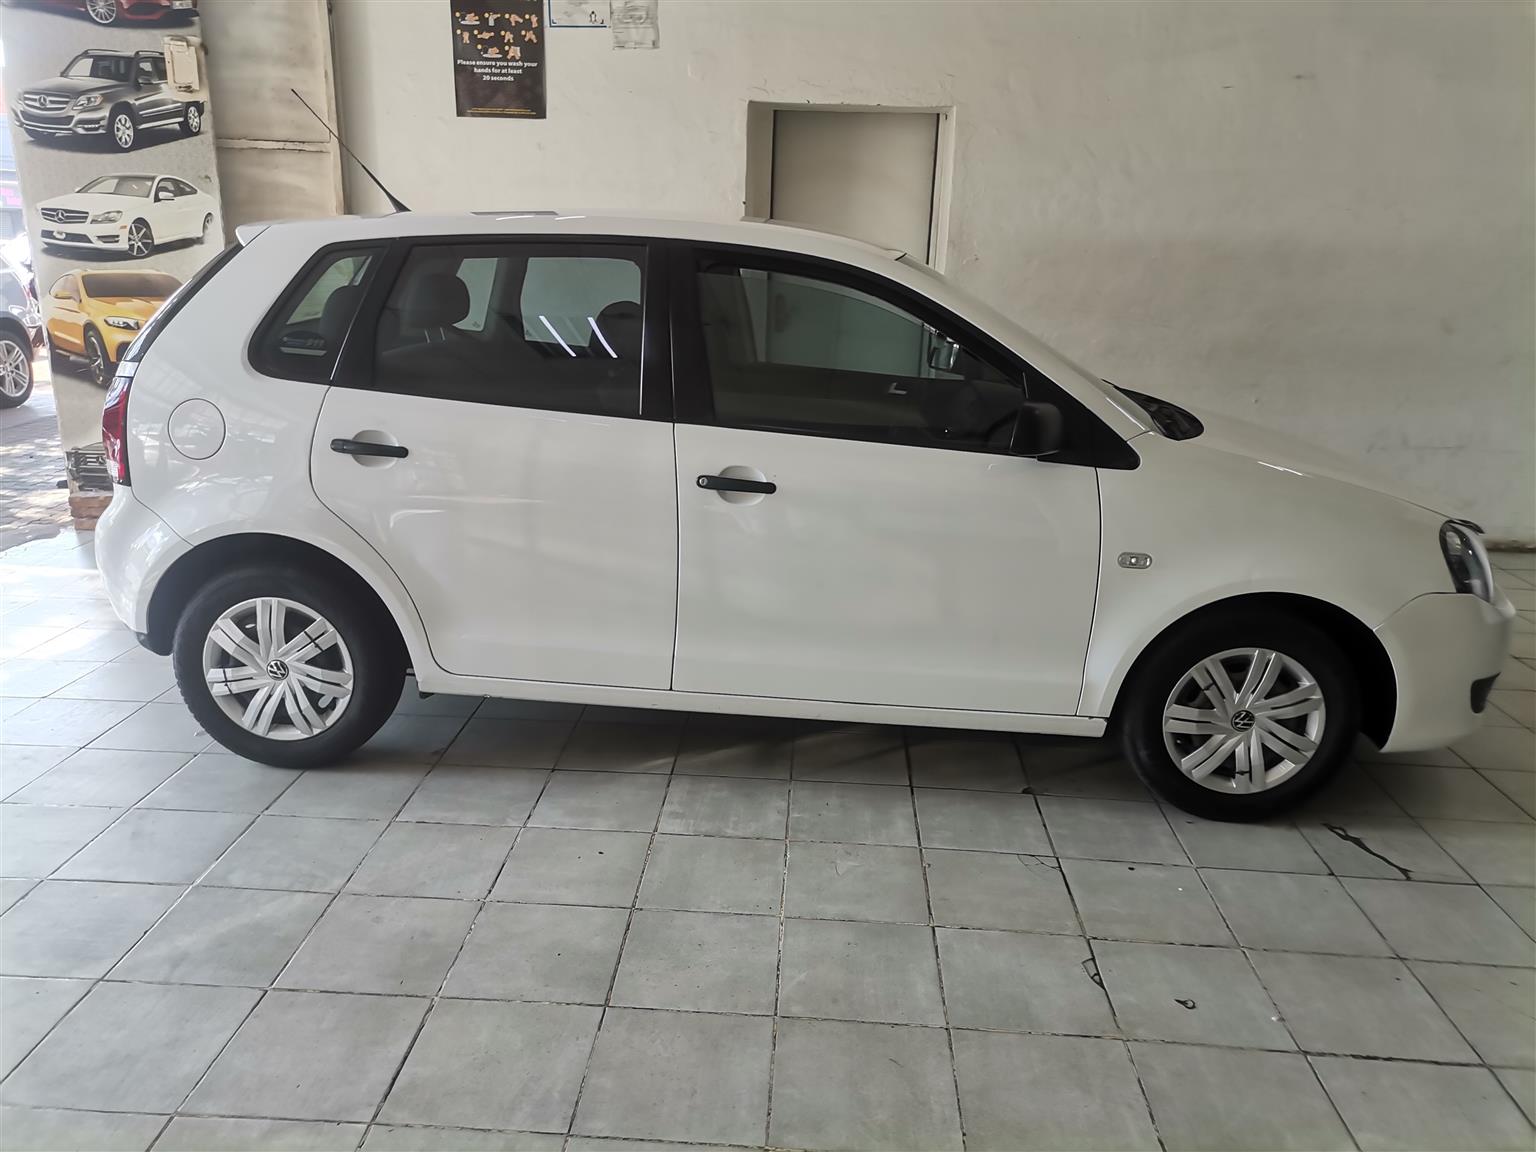 2012 VW Polo Vivo 1.4, Manual Mechanically perfect with Clothes Seat